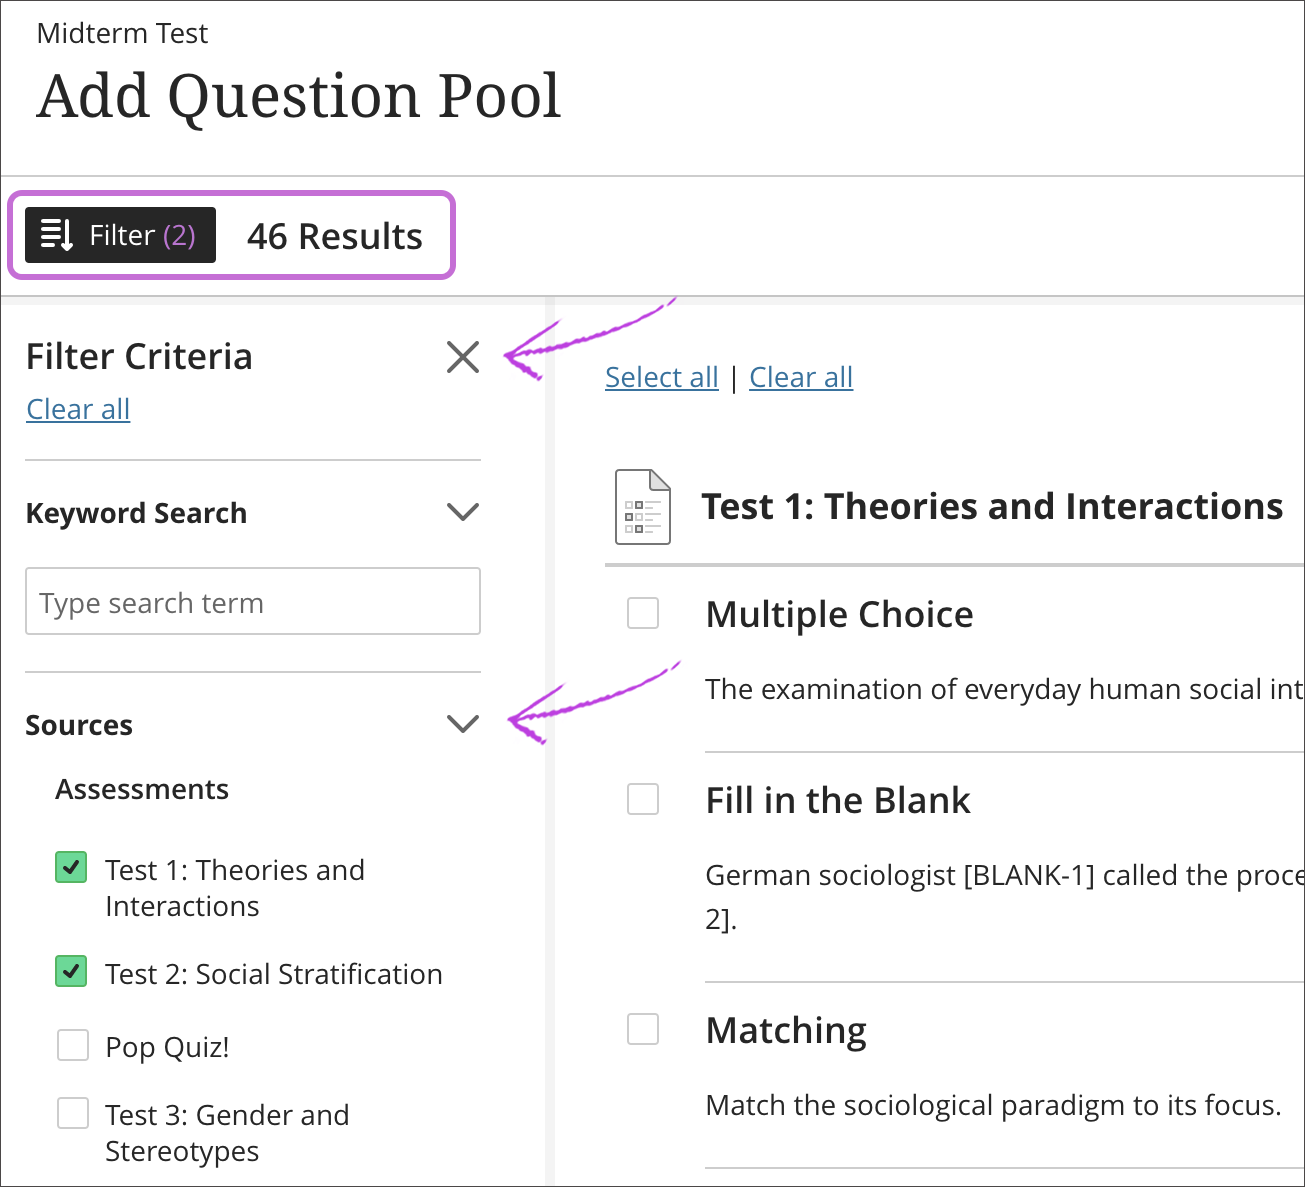 Add question pool panel is open with the filter criteria panel open. The sources section is expanded showing the options.